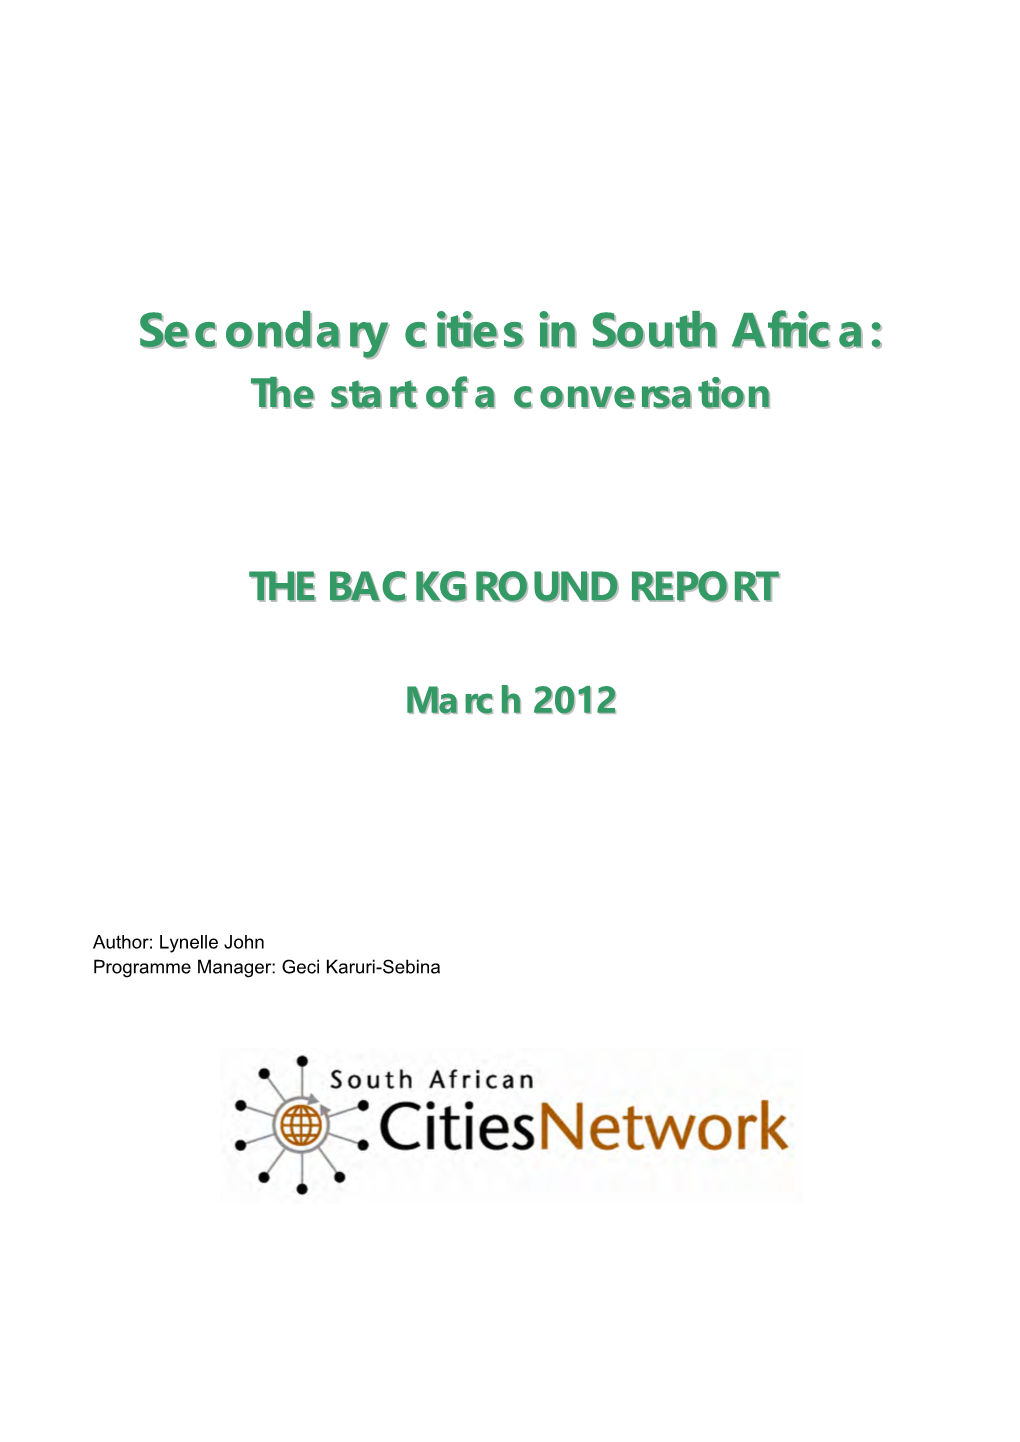 Secondary Cities in South Africa: the Start of a Conversation Background Report